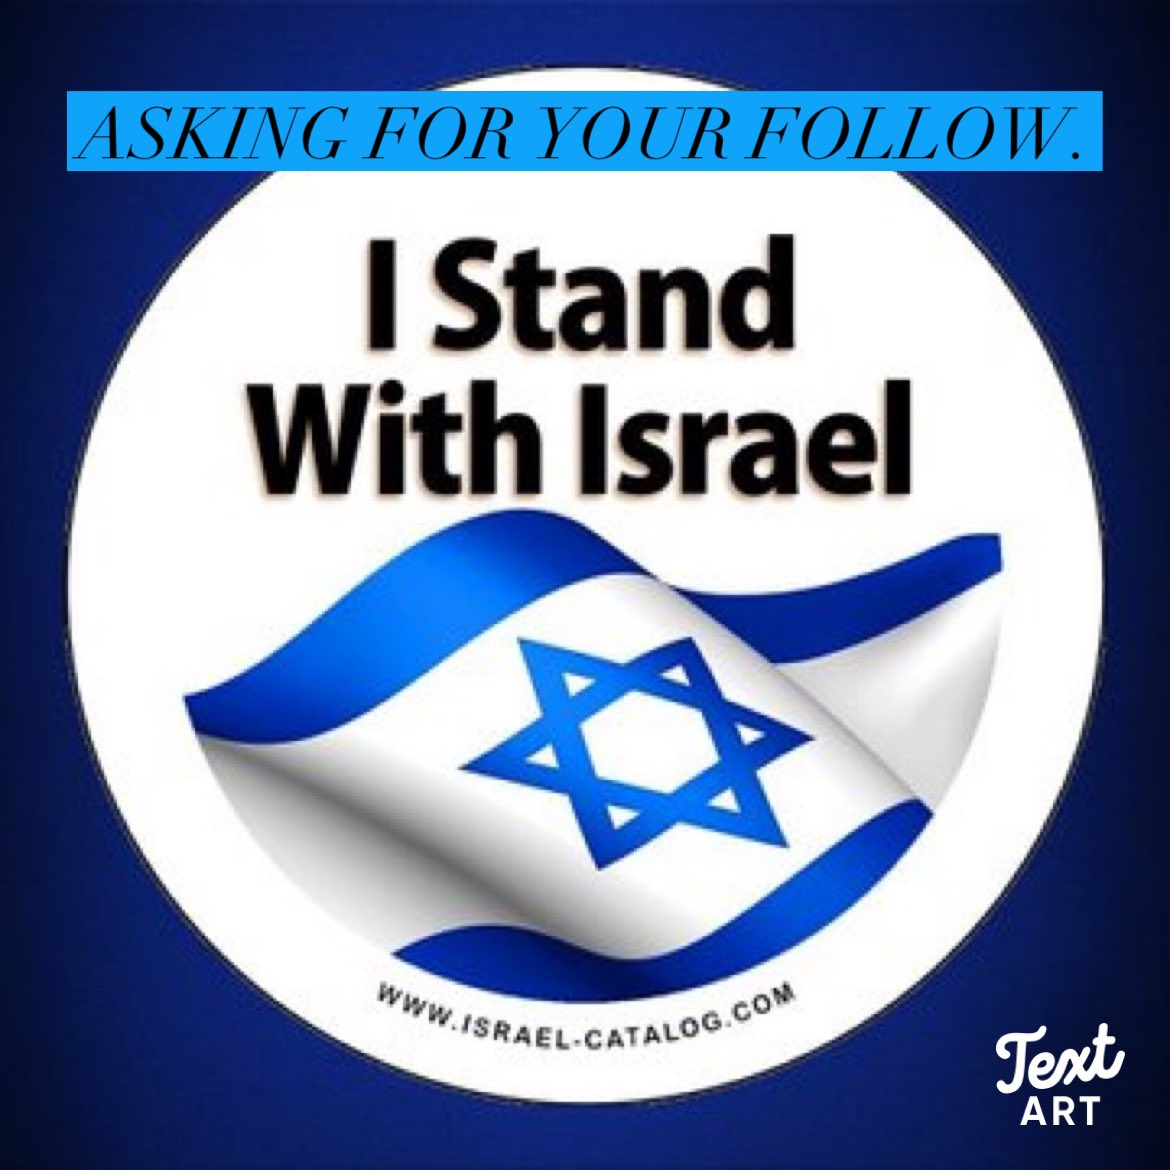 Please help me fight for Israel. Please add your voice to mine. Together we can reach more people.